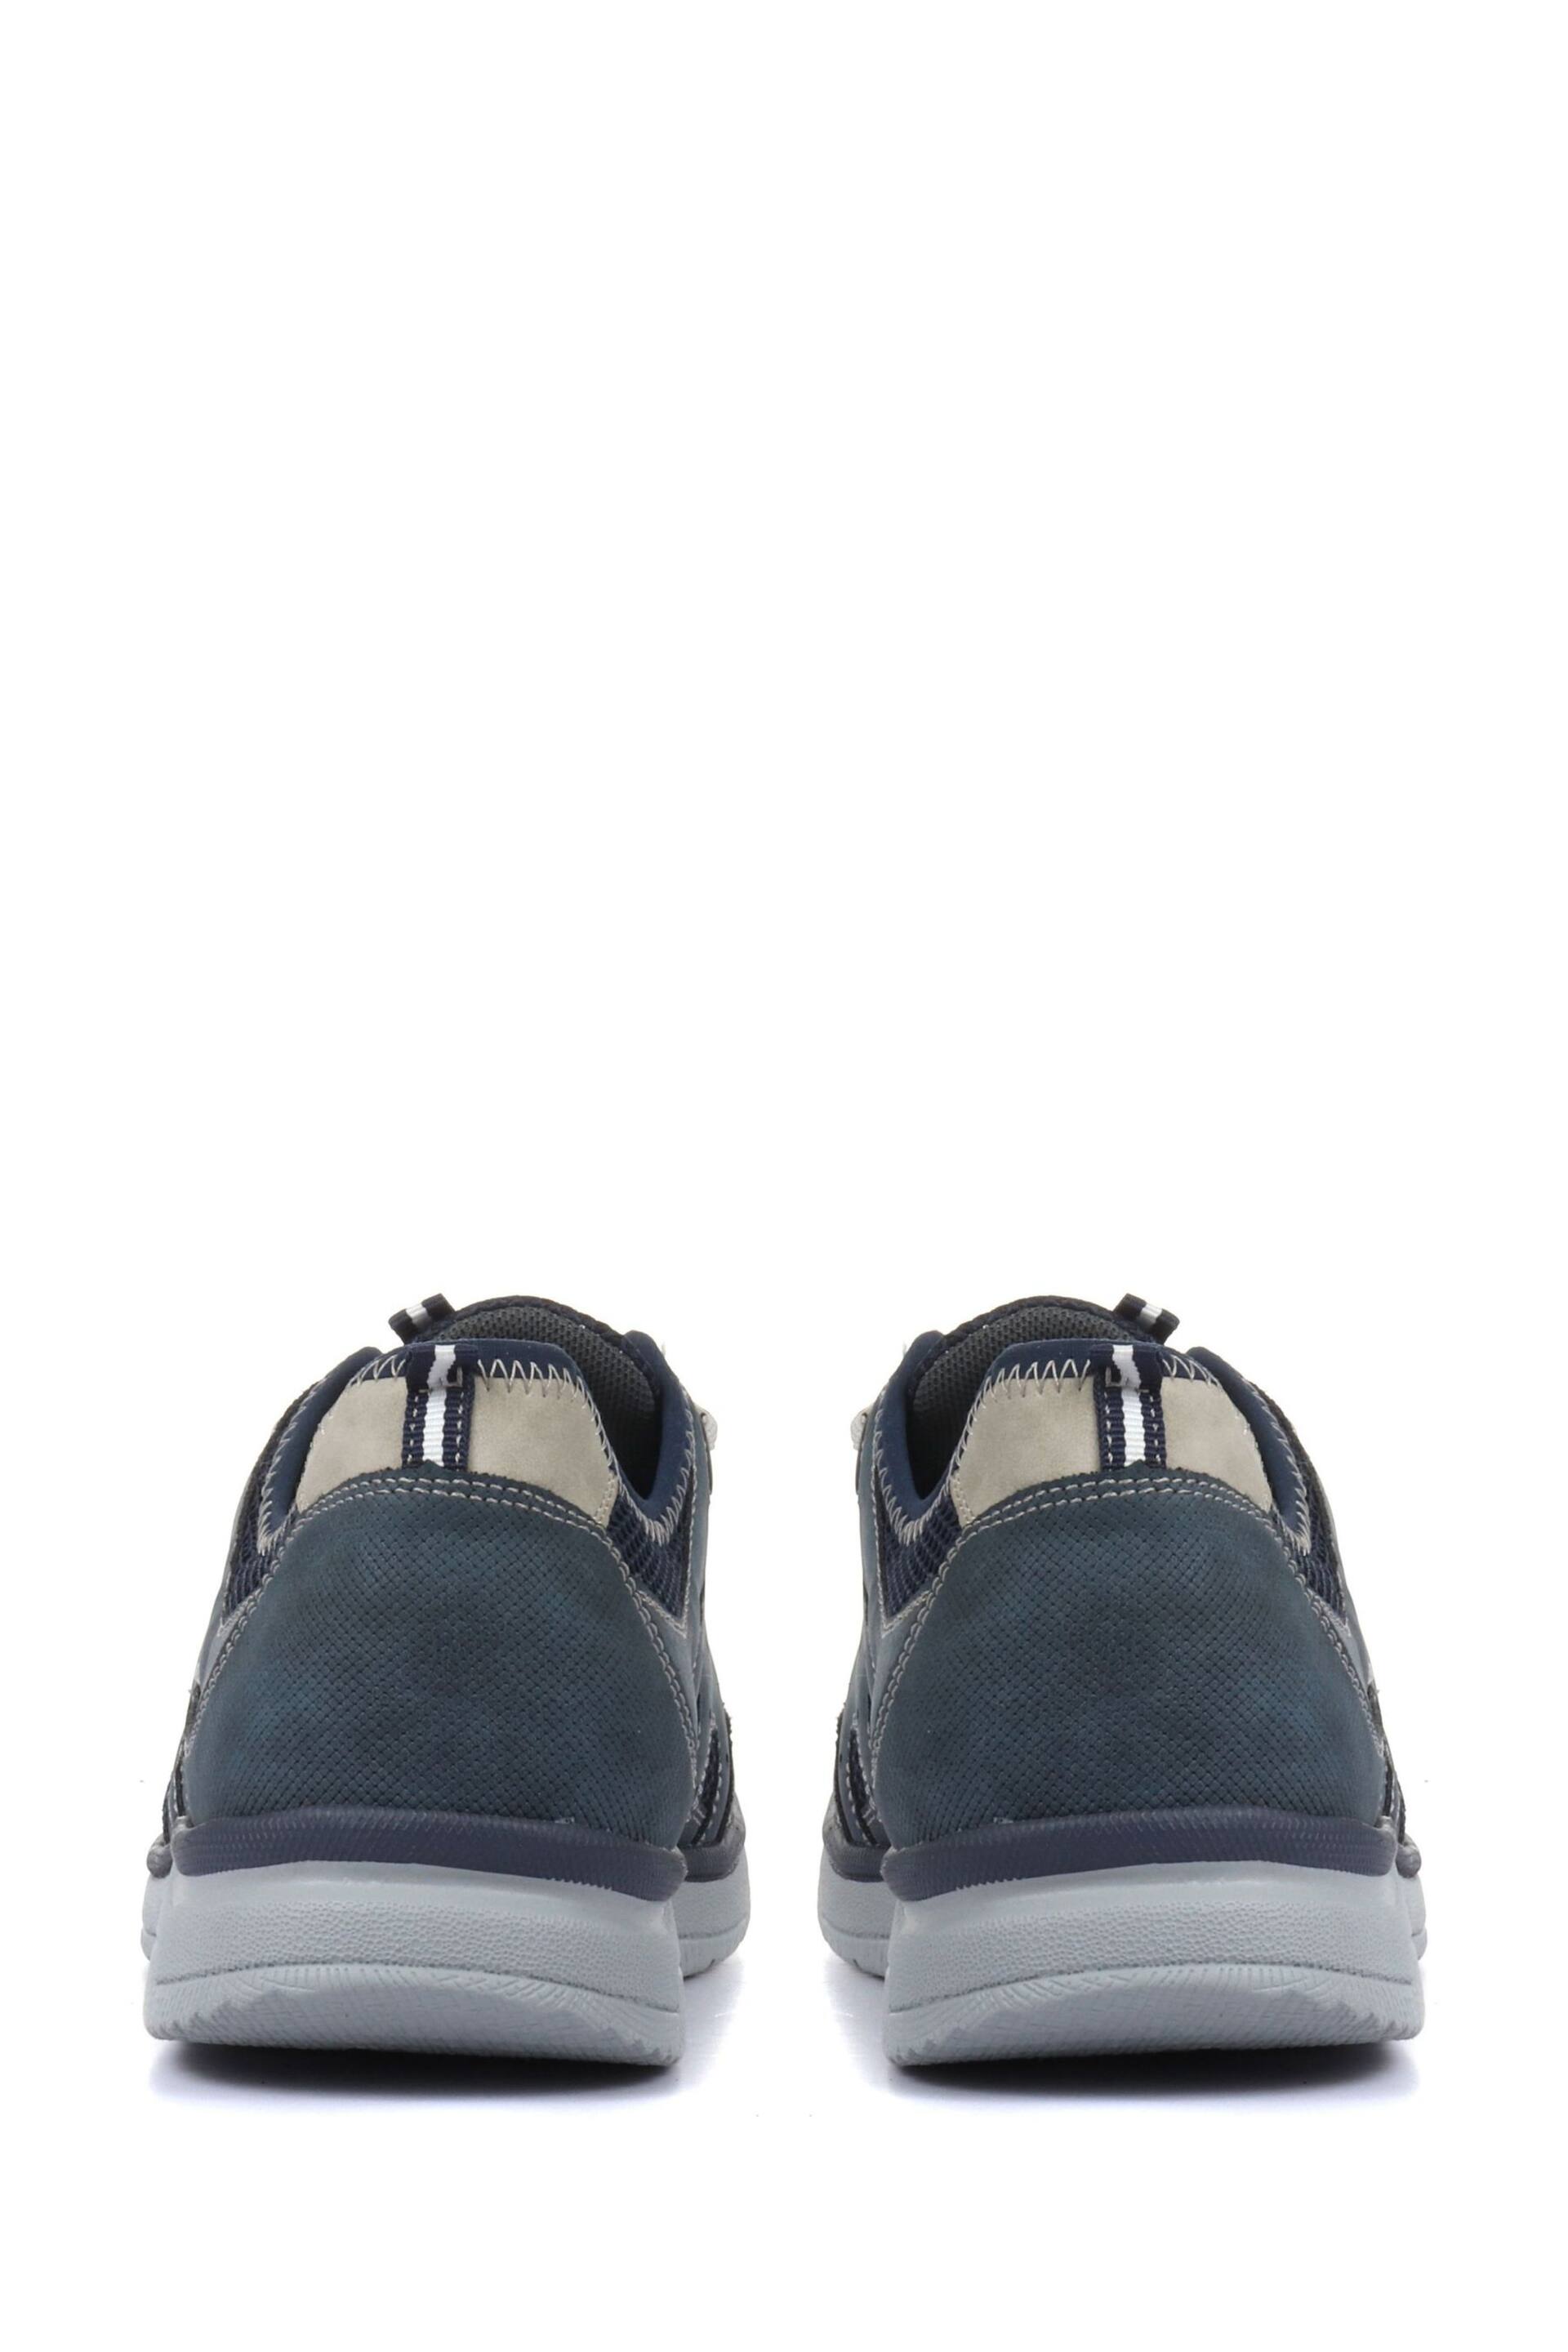 Pavers Blue Mens Wide Fit Lace-Up Trainers - Image 3 of 5